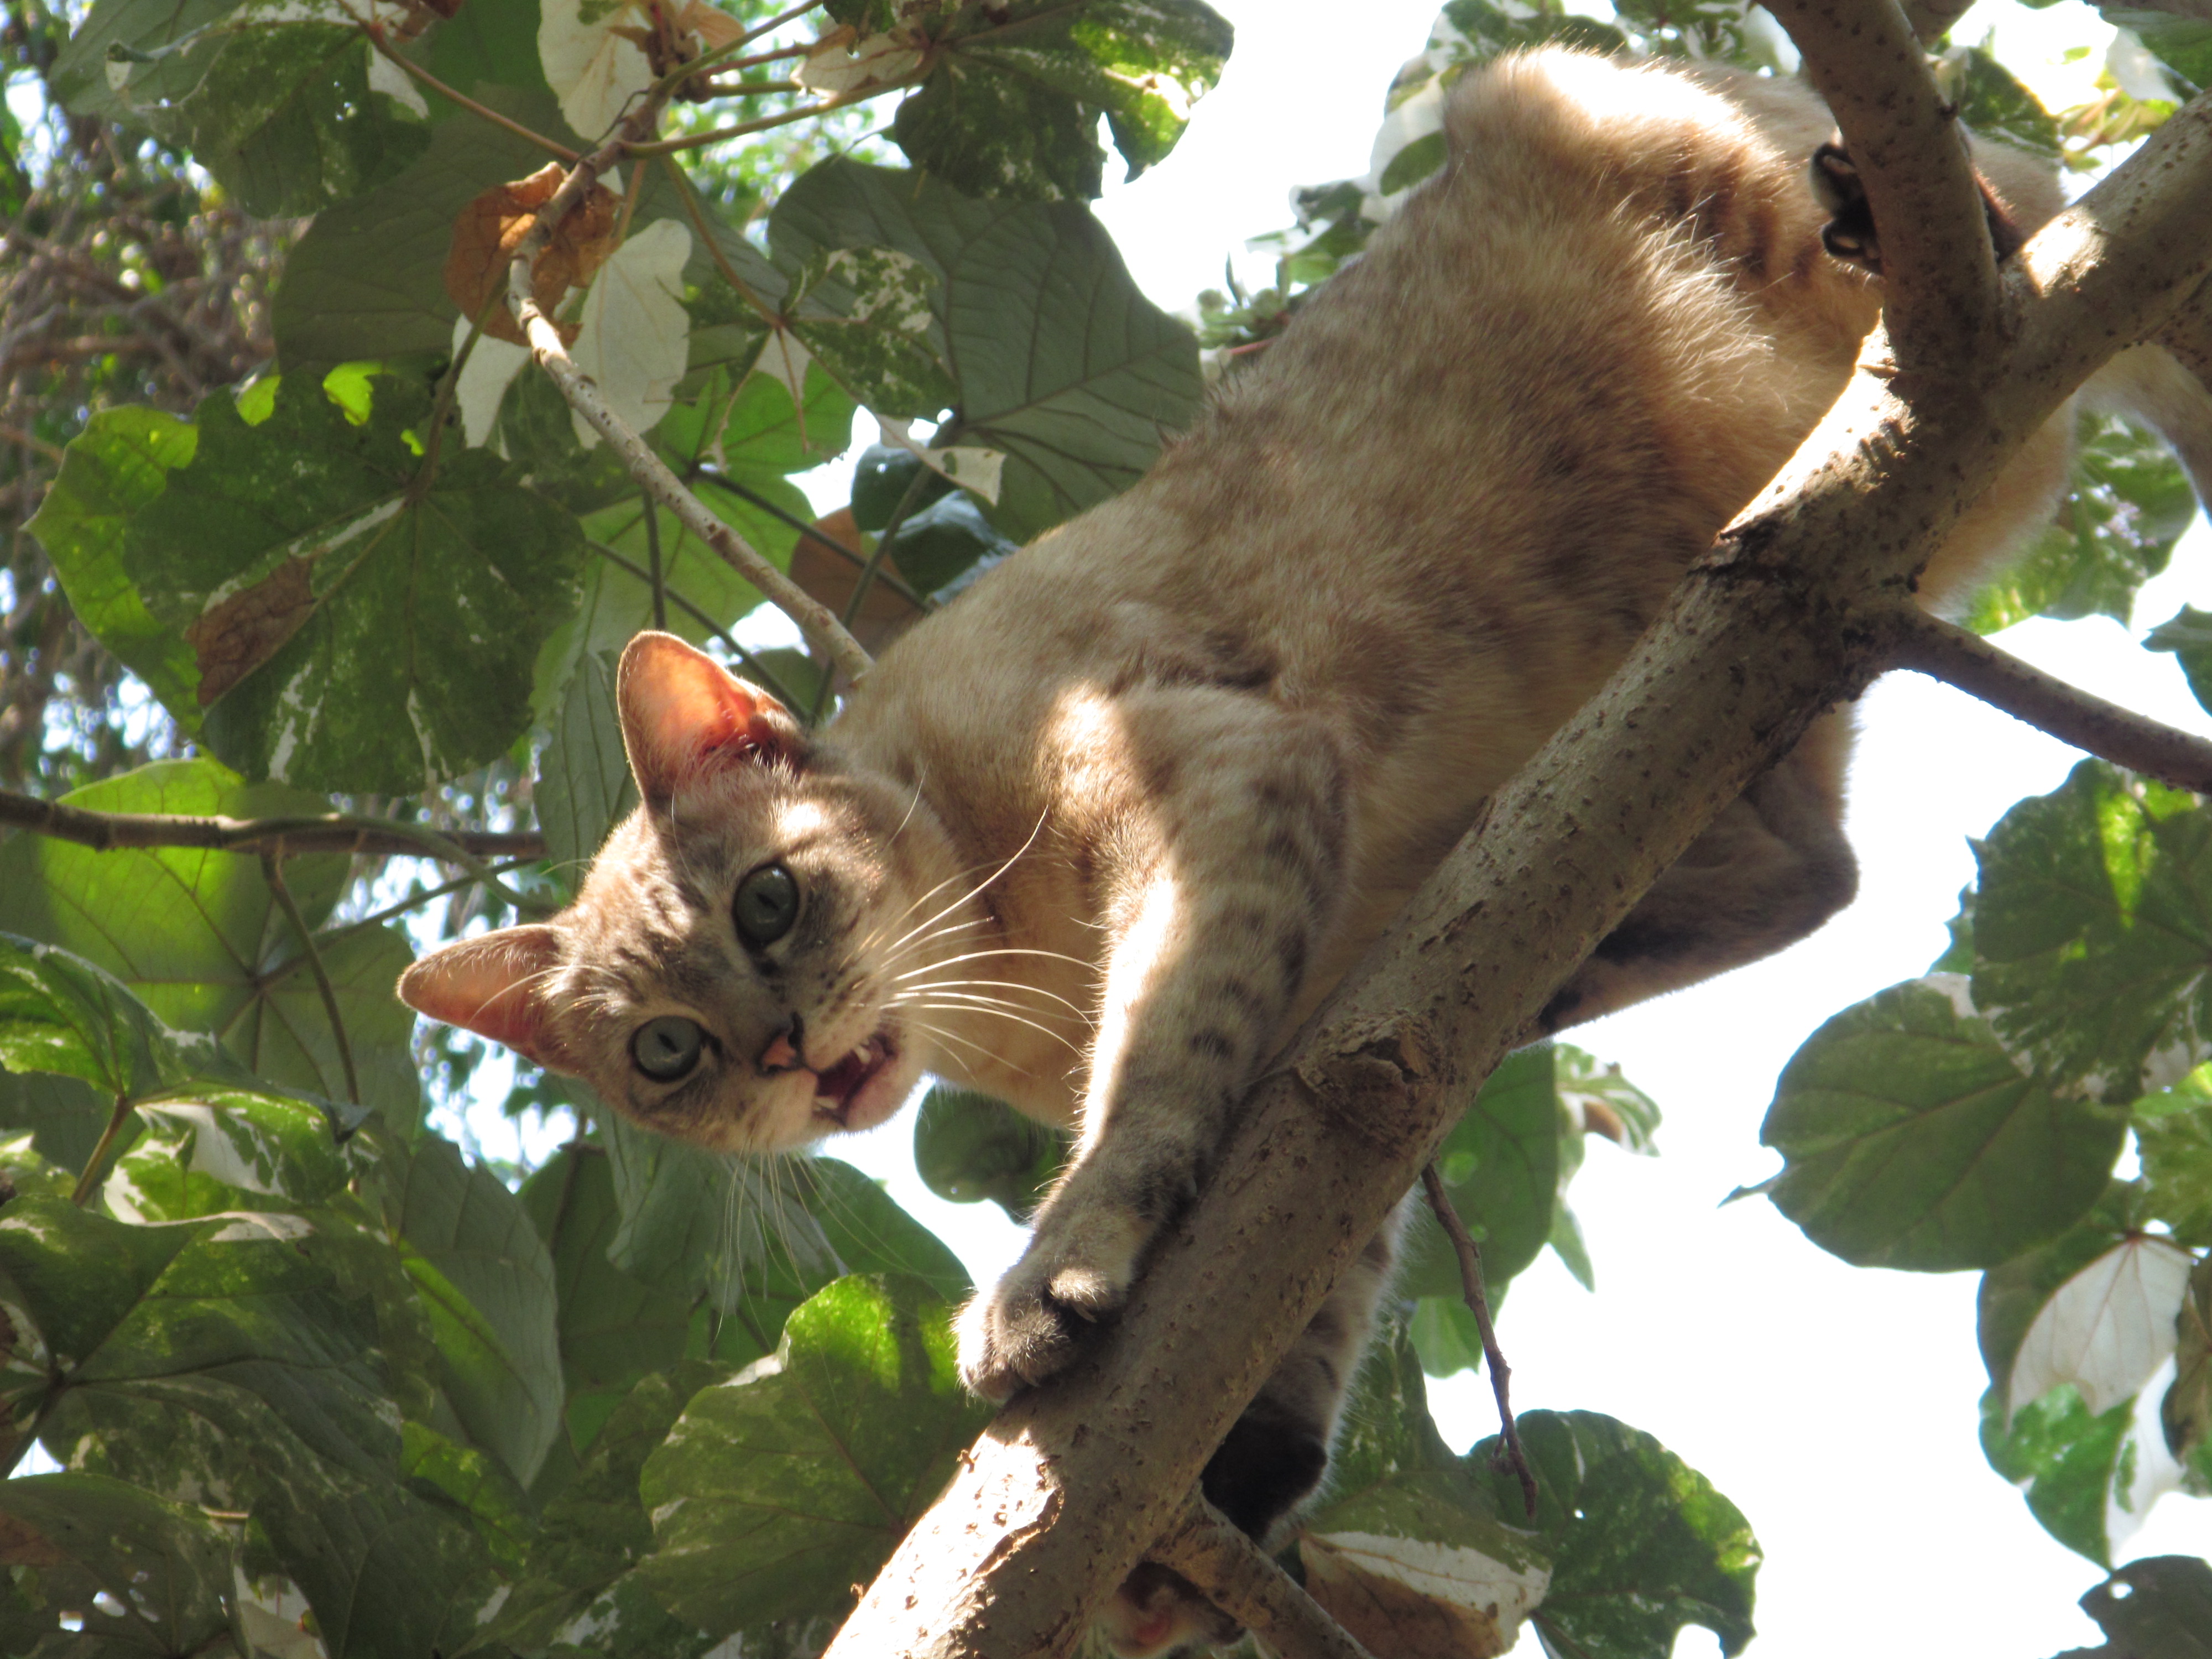 A cat stuck up in a tree.  I got the picture at the exact right moment lol!